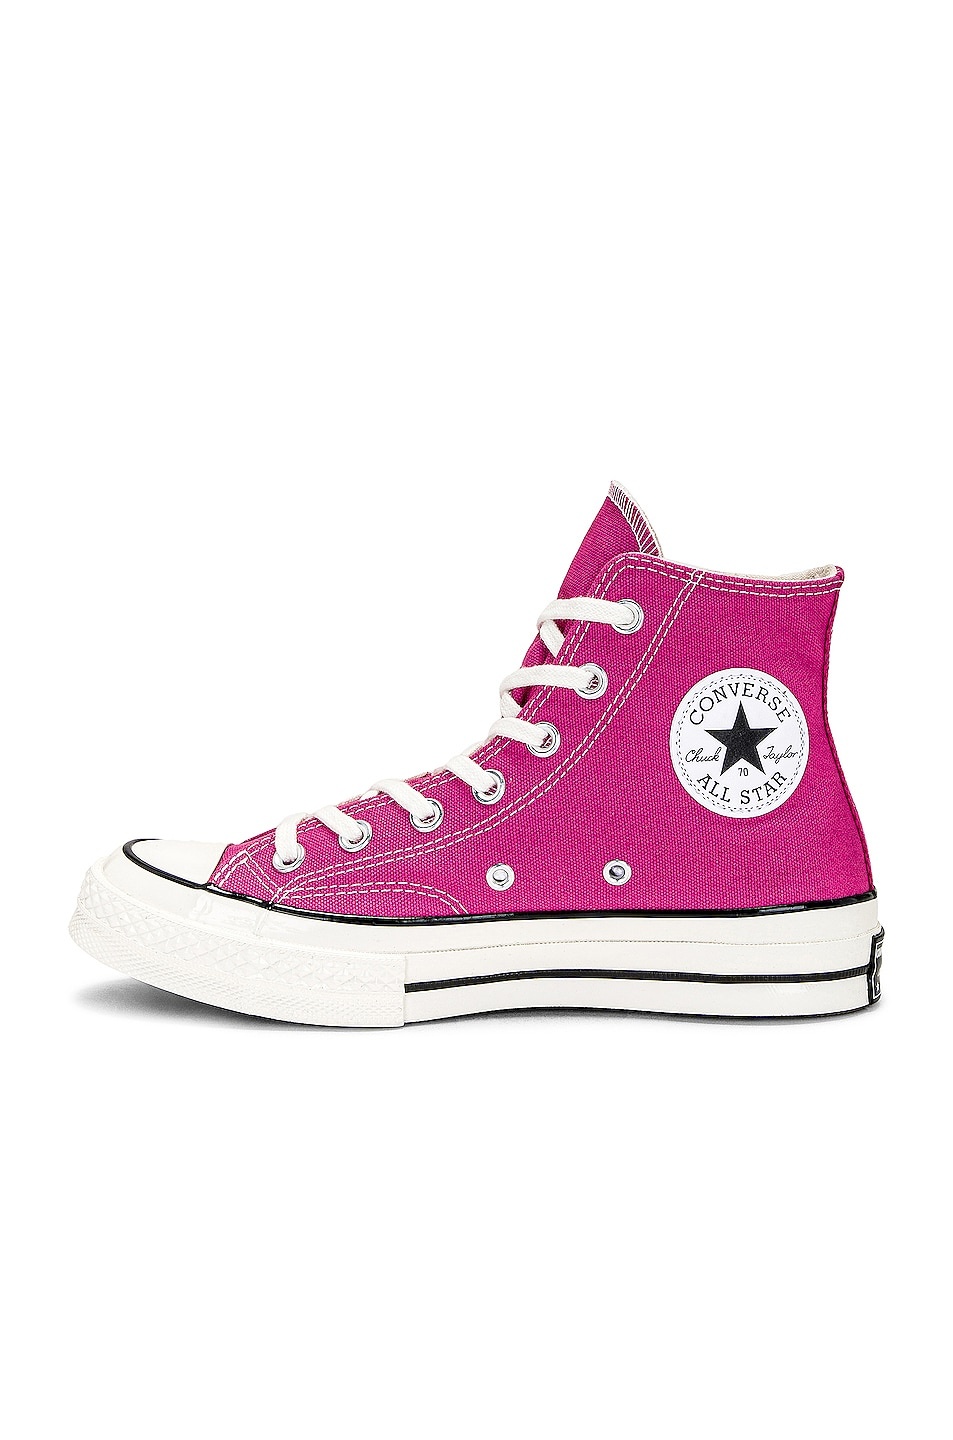 Chuck 70 Fall Tone In Lucky Pink/egret/black - 5